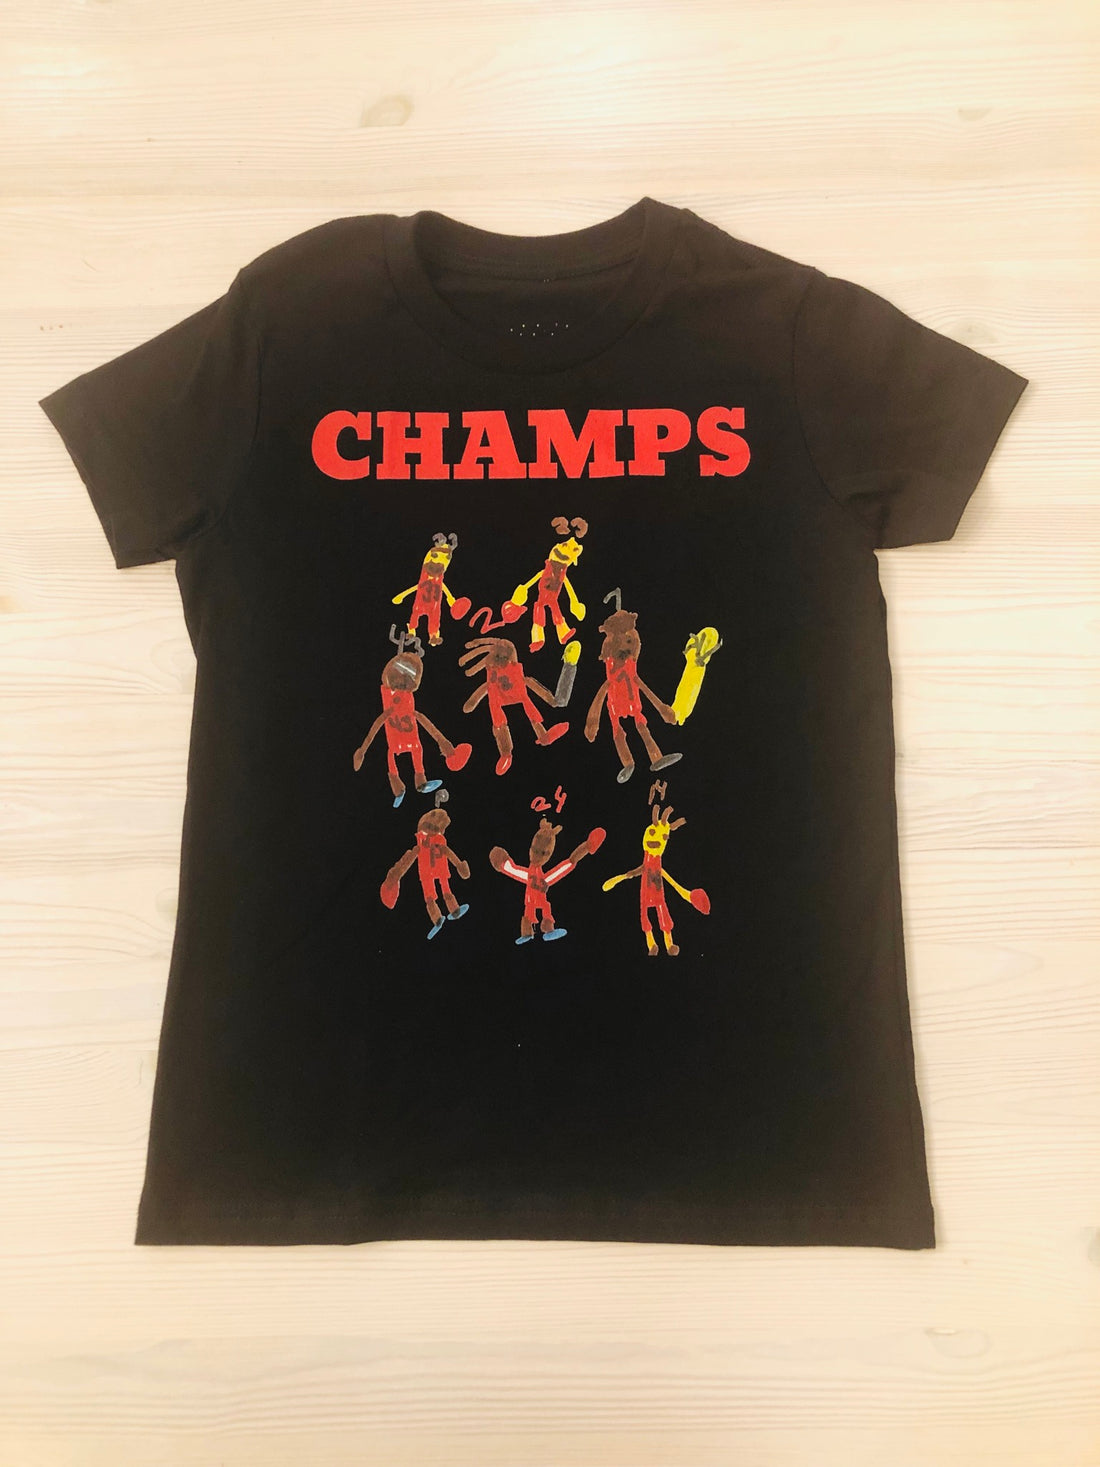 The Story behind the Champion Collection